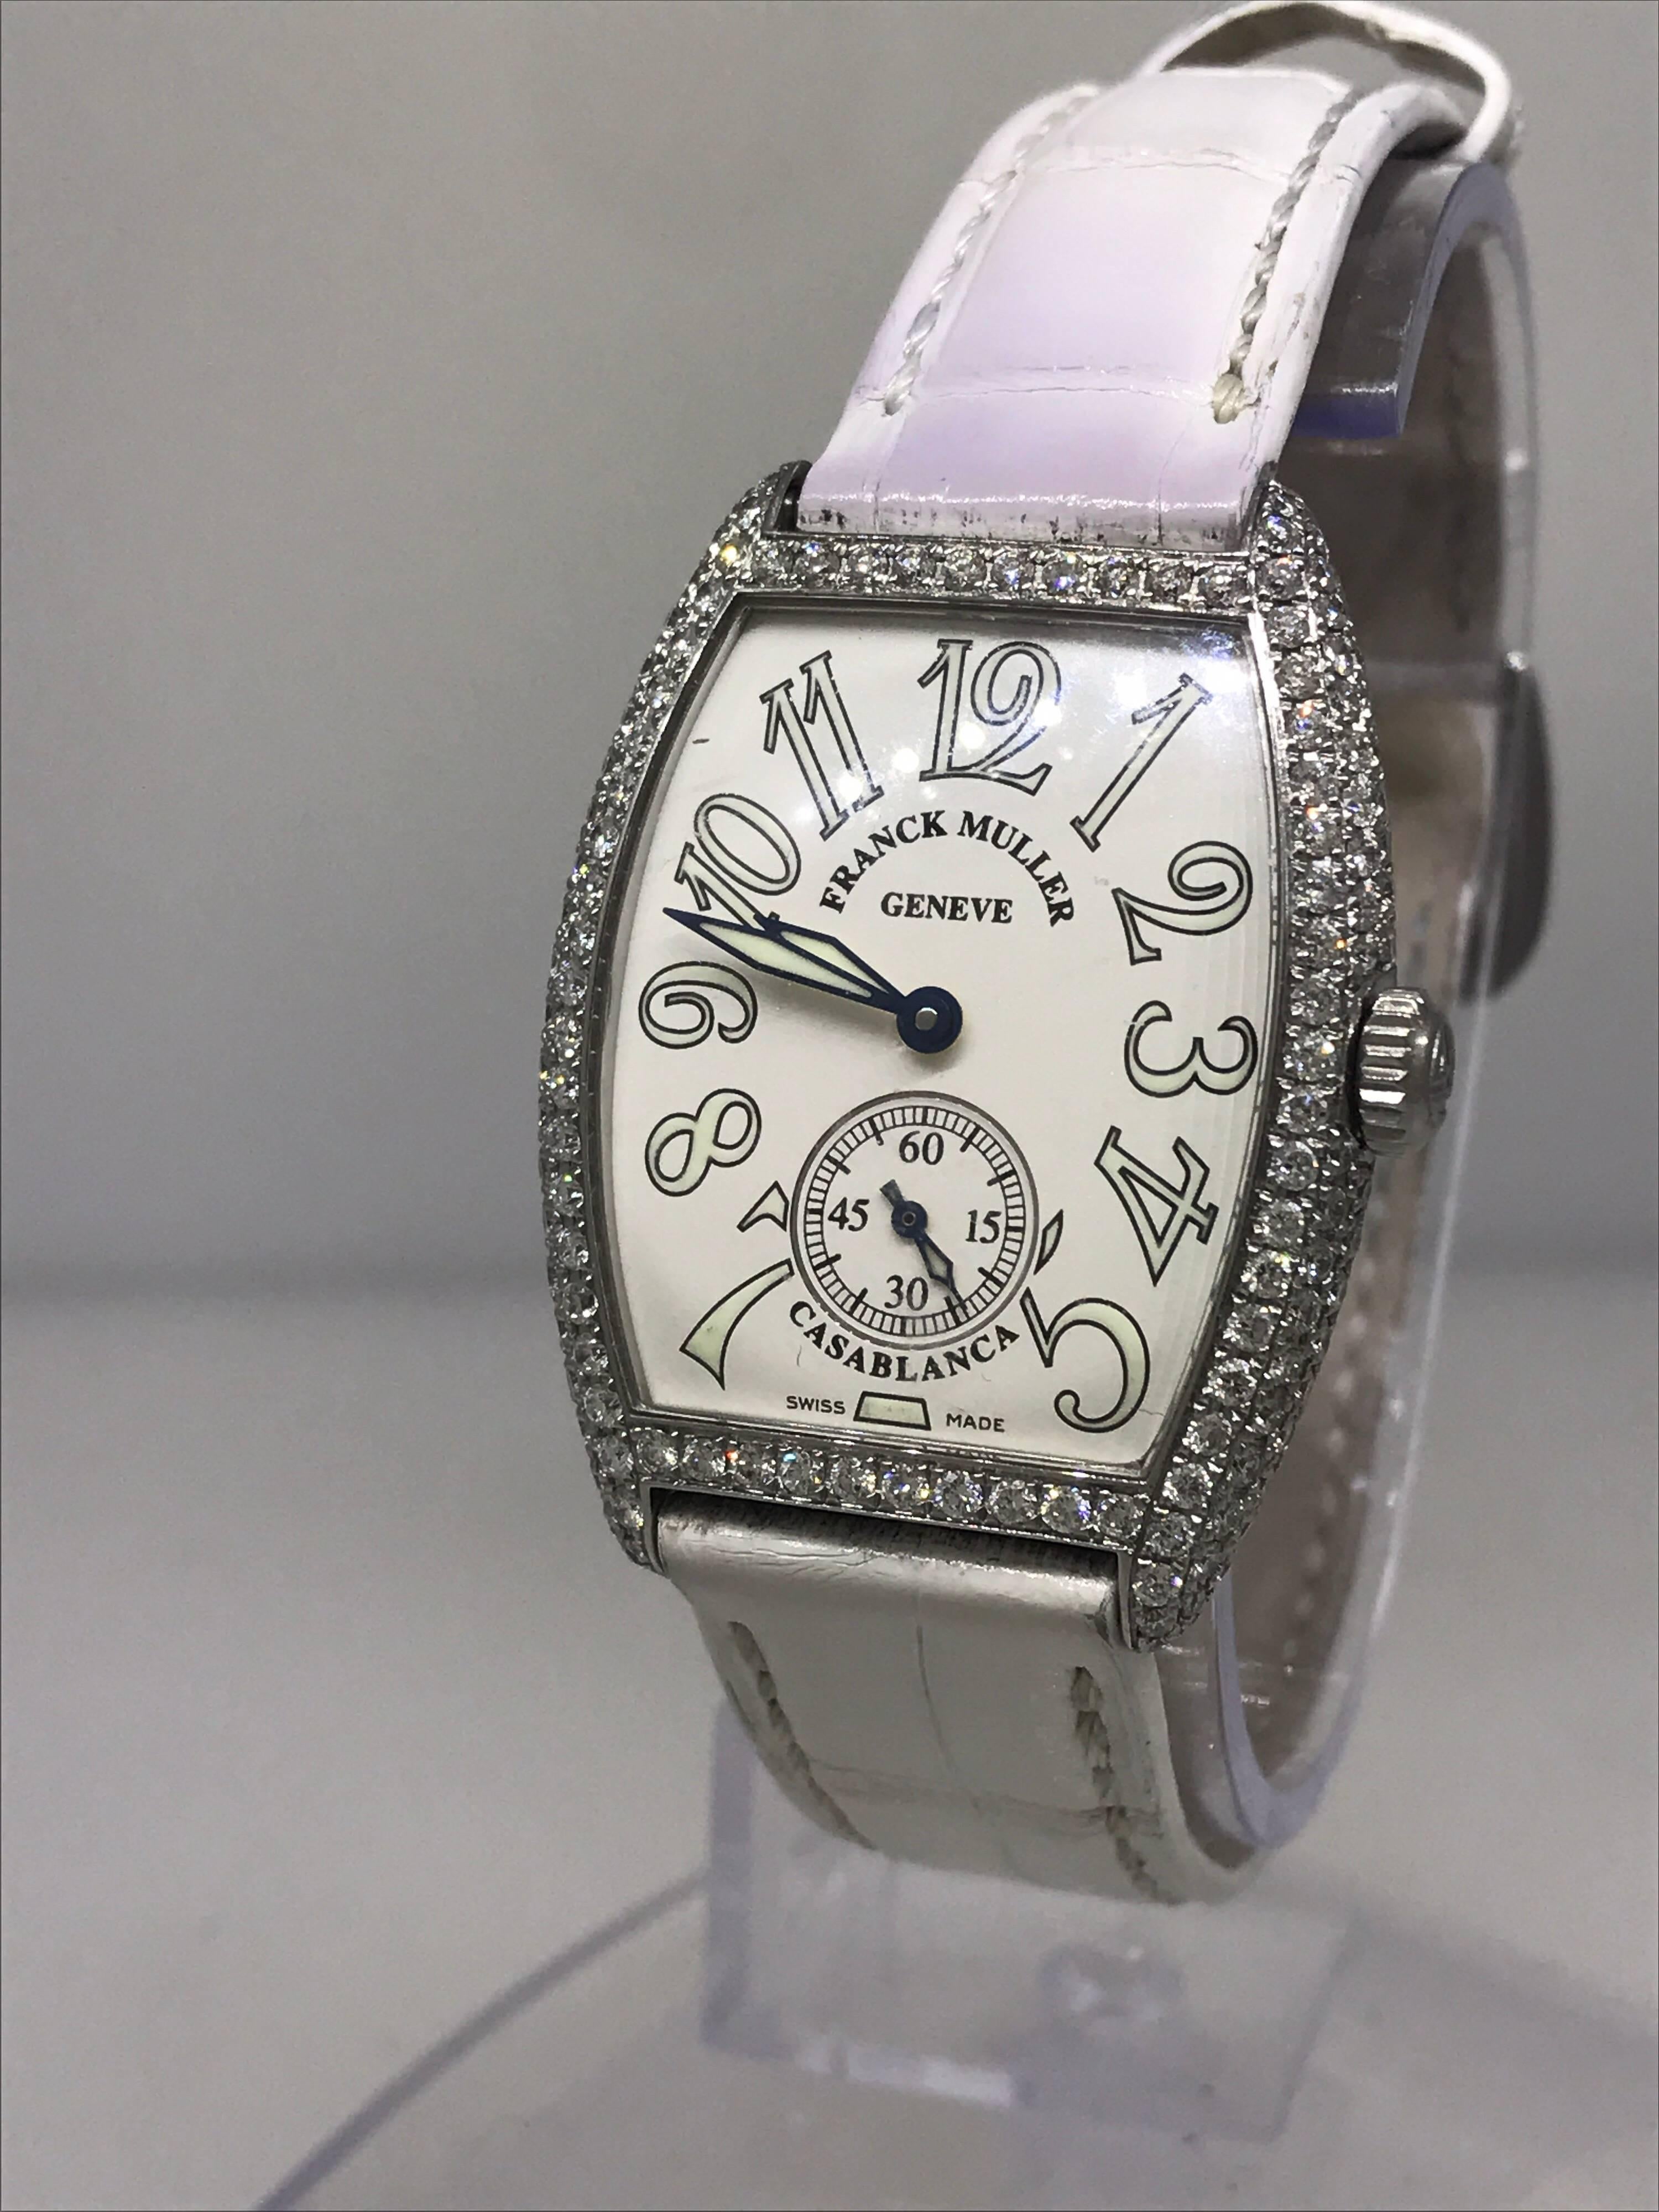 Franck Muller Casablanca Curvex Lady's Watch

Model Number: 7500

100% Authentic

Pre-owned / Excellent condition

Comes with original Franck Muller box and warranty

Stainless Steel Case and buckle

Case and bezel set with diamonds (Diamonds are